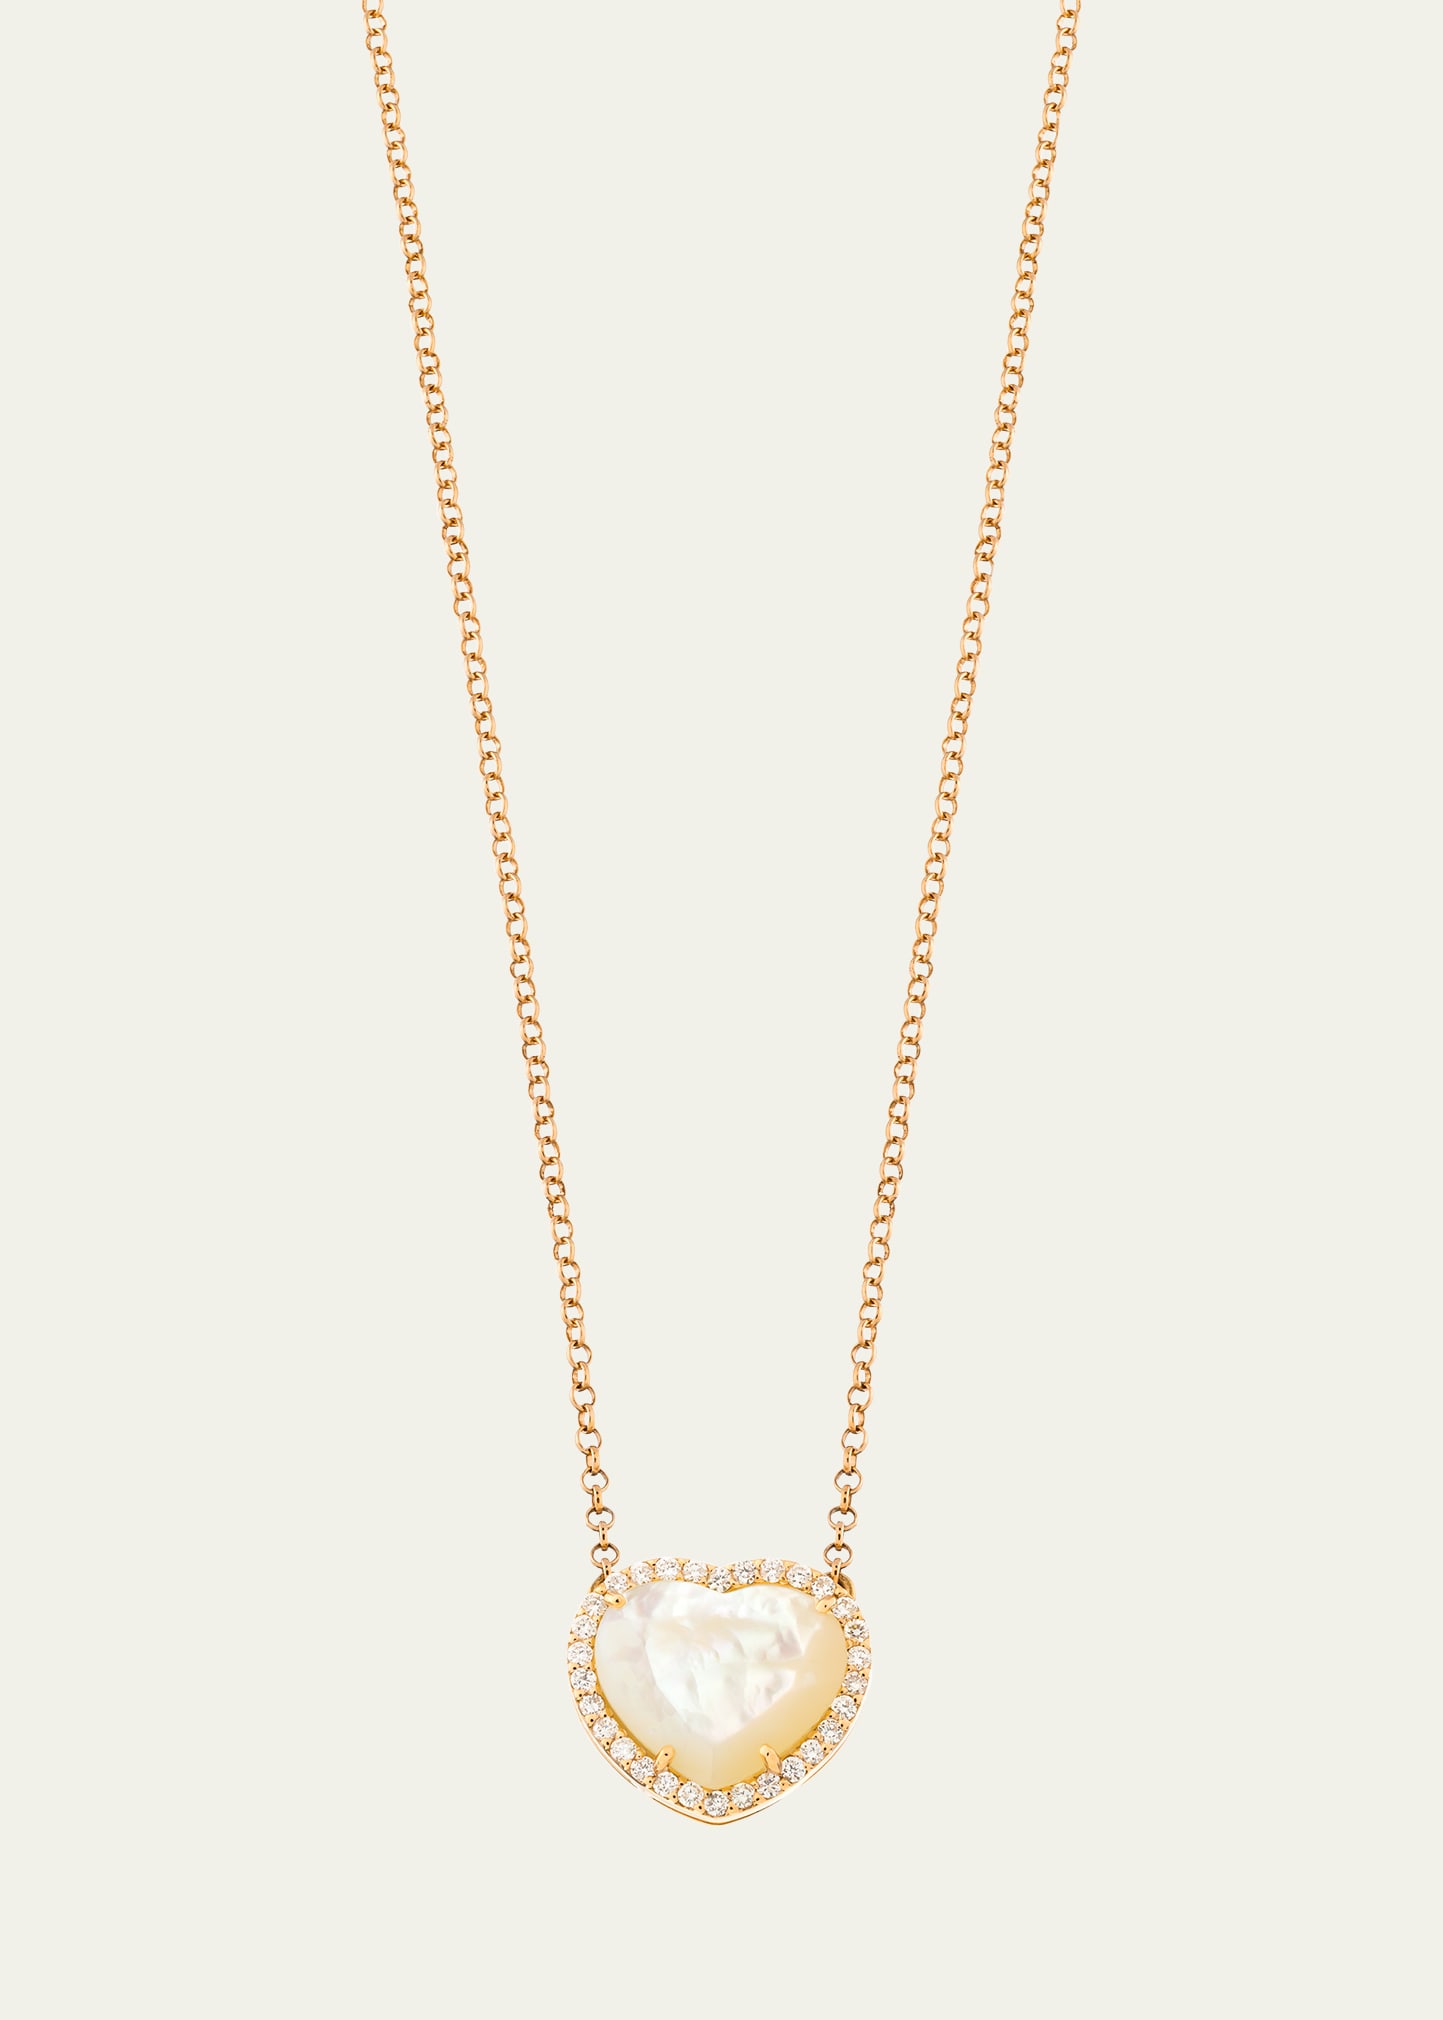 18K Rose Gold Medium Heart Necklace with Mother of Pearl and Diamonds